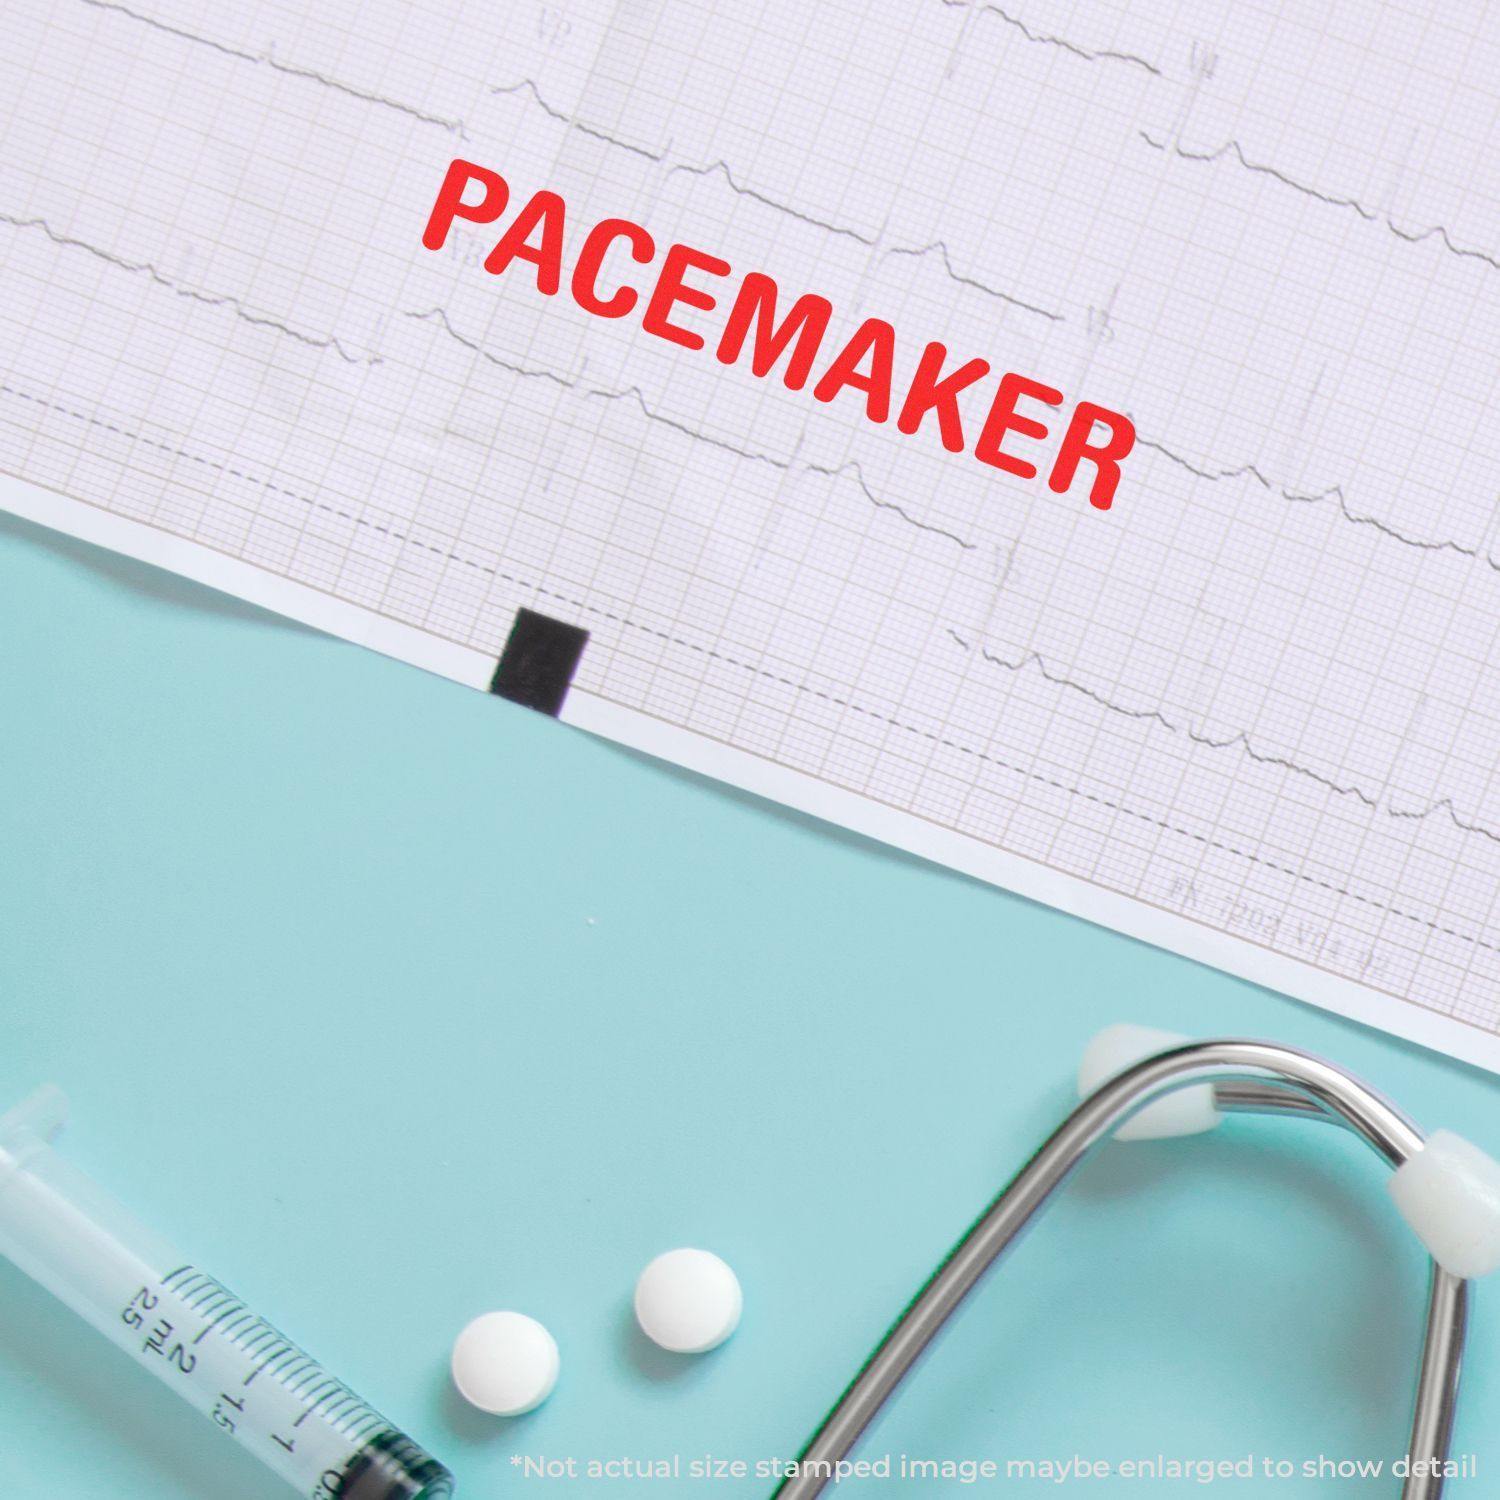 Pacemaker Rubber Stamp - Engineer Seal Stamps - Brand_Acorn, Impression Size_Small, Stamp Type_Regular Stamp, Type of Use_Medical Office